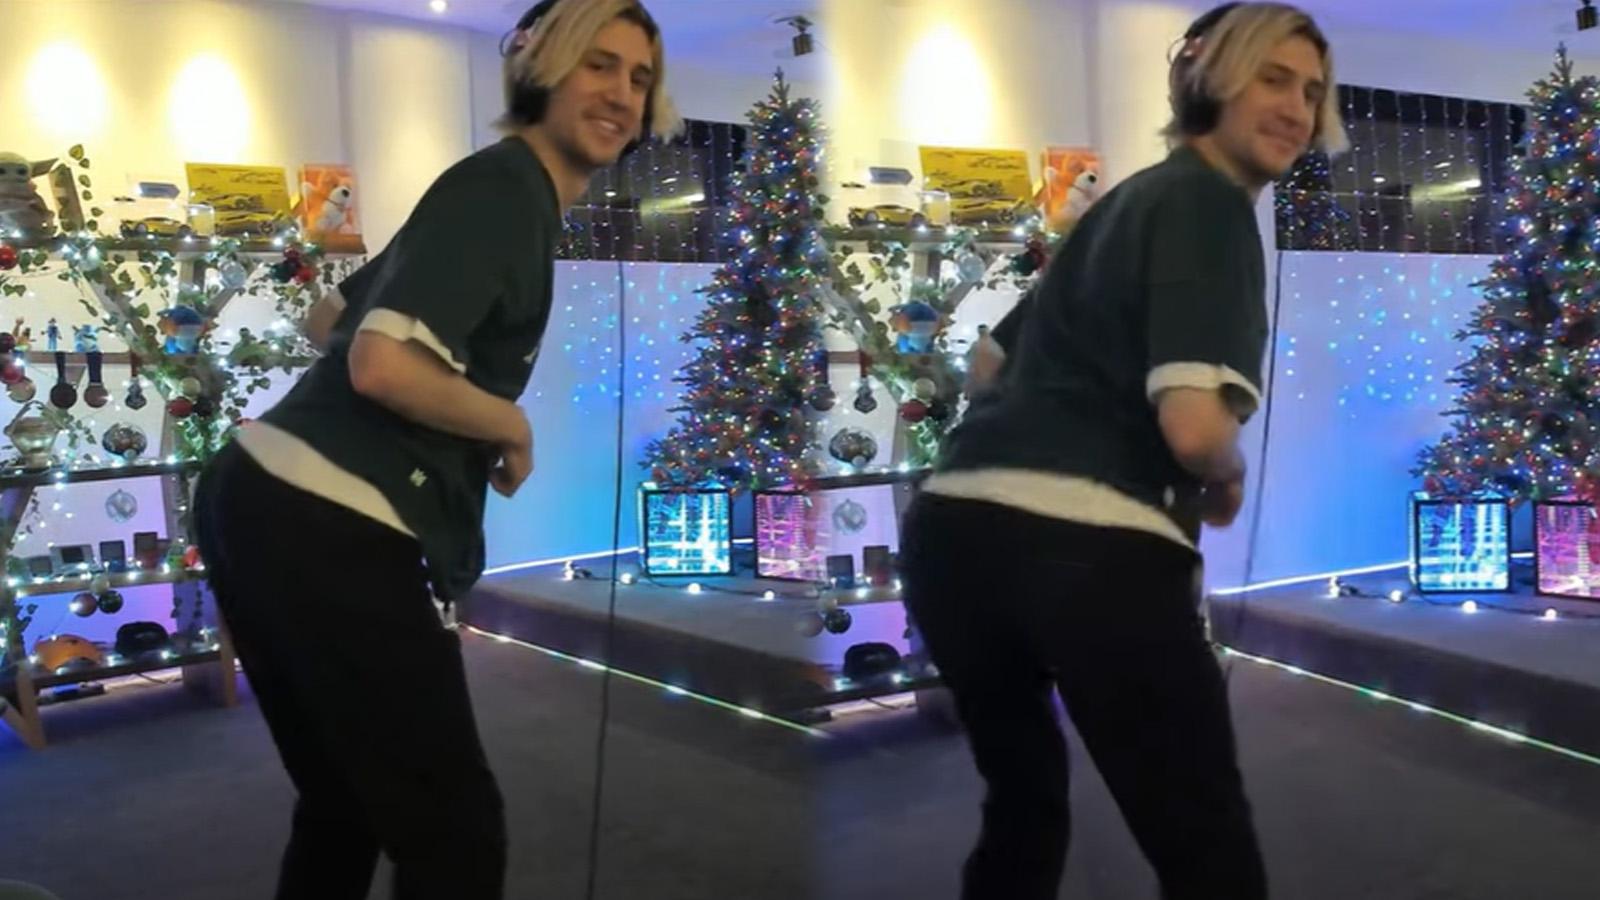 xQc twerks on stream to celebrate updated Twitch guidelines on sexual content